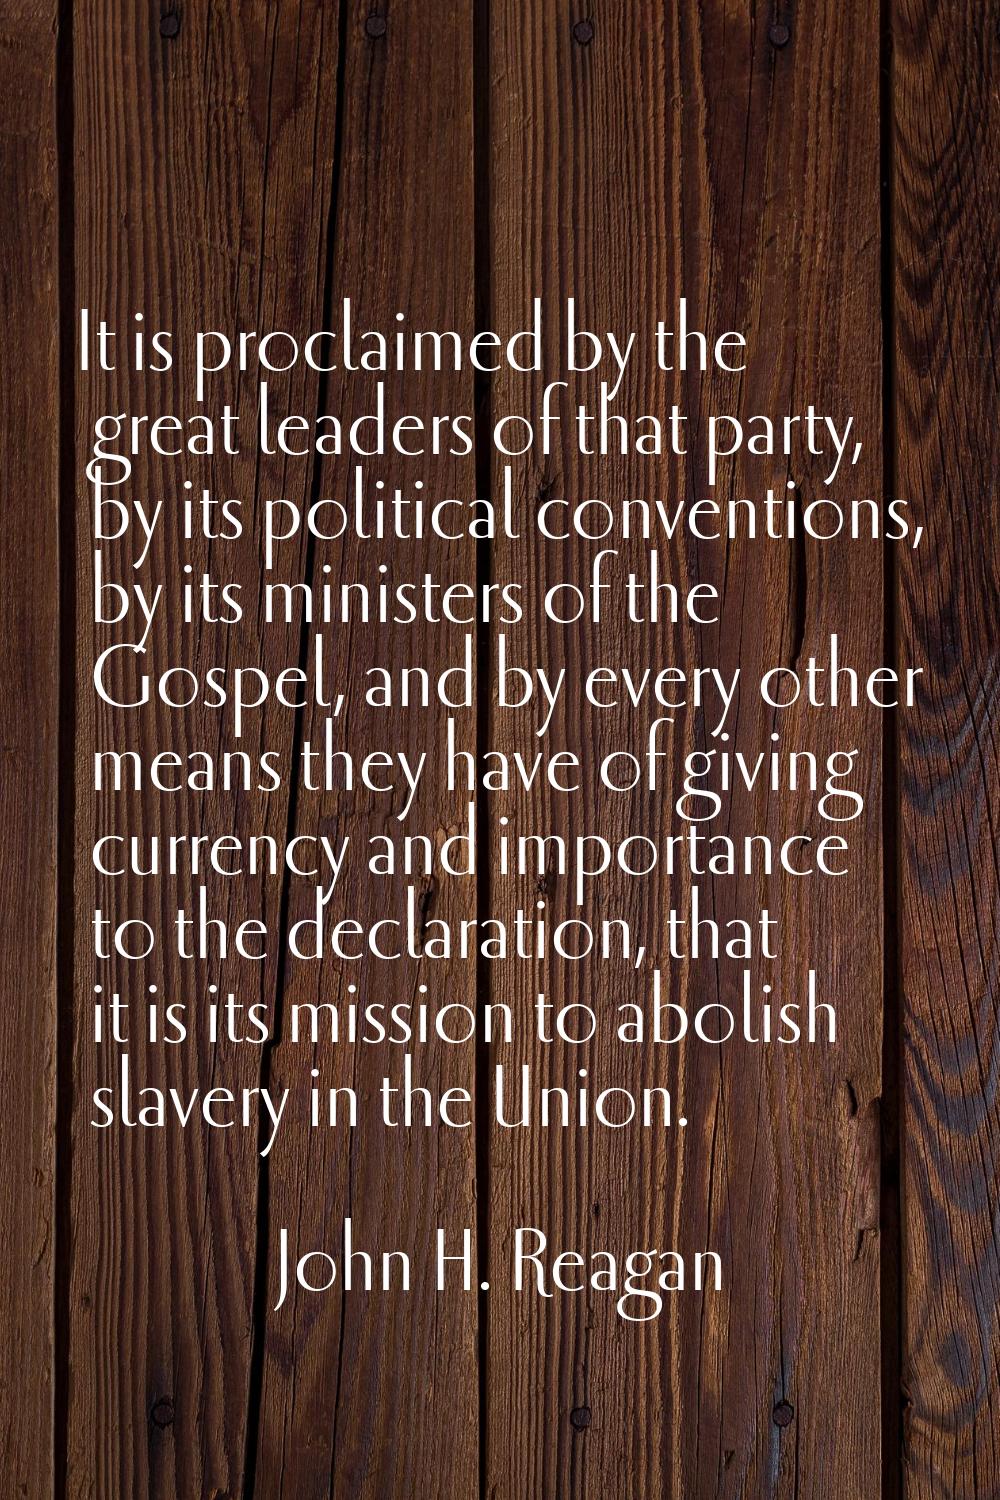 It is proclaimed by the great leaders of that party, by its political conventions, by its ministers